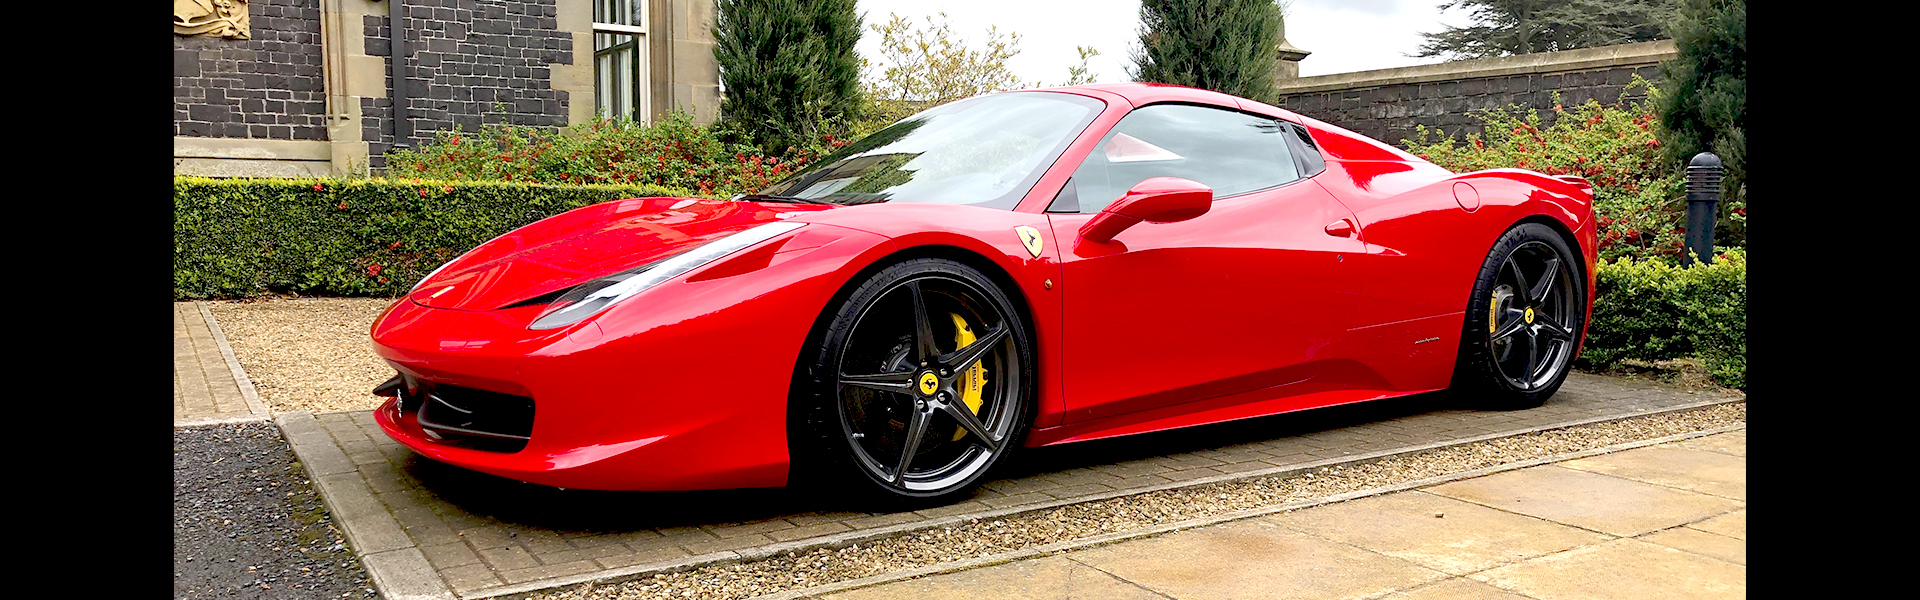 Ferrari 458 gets its soul and looks back – Novitec exhaust and sport springs